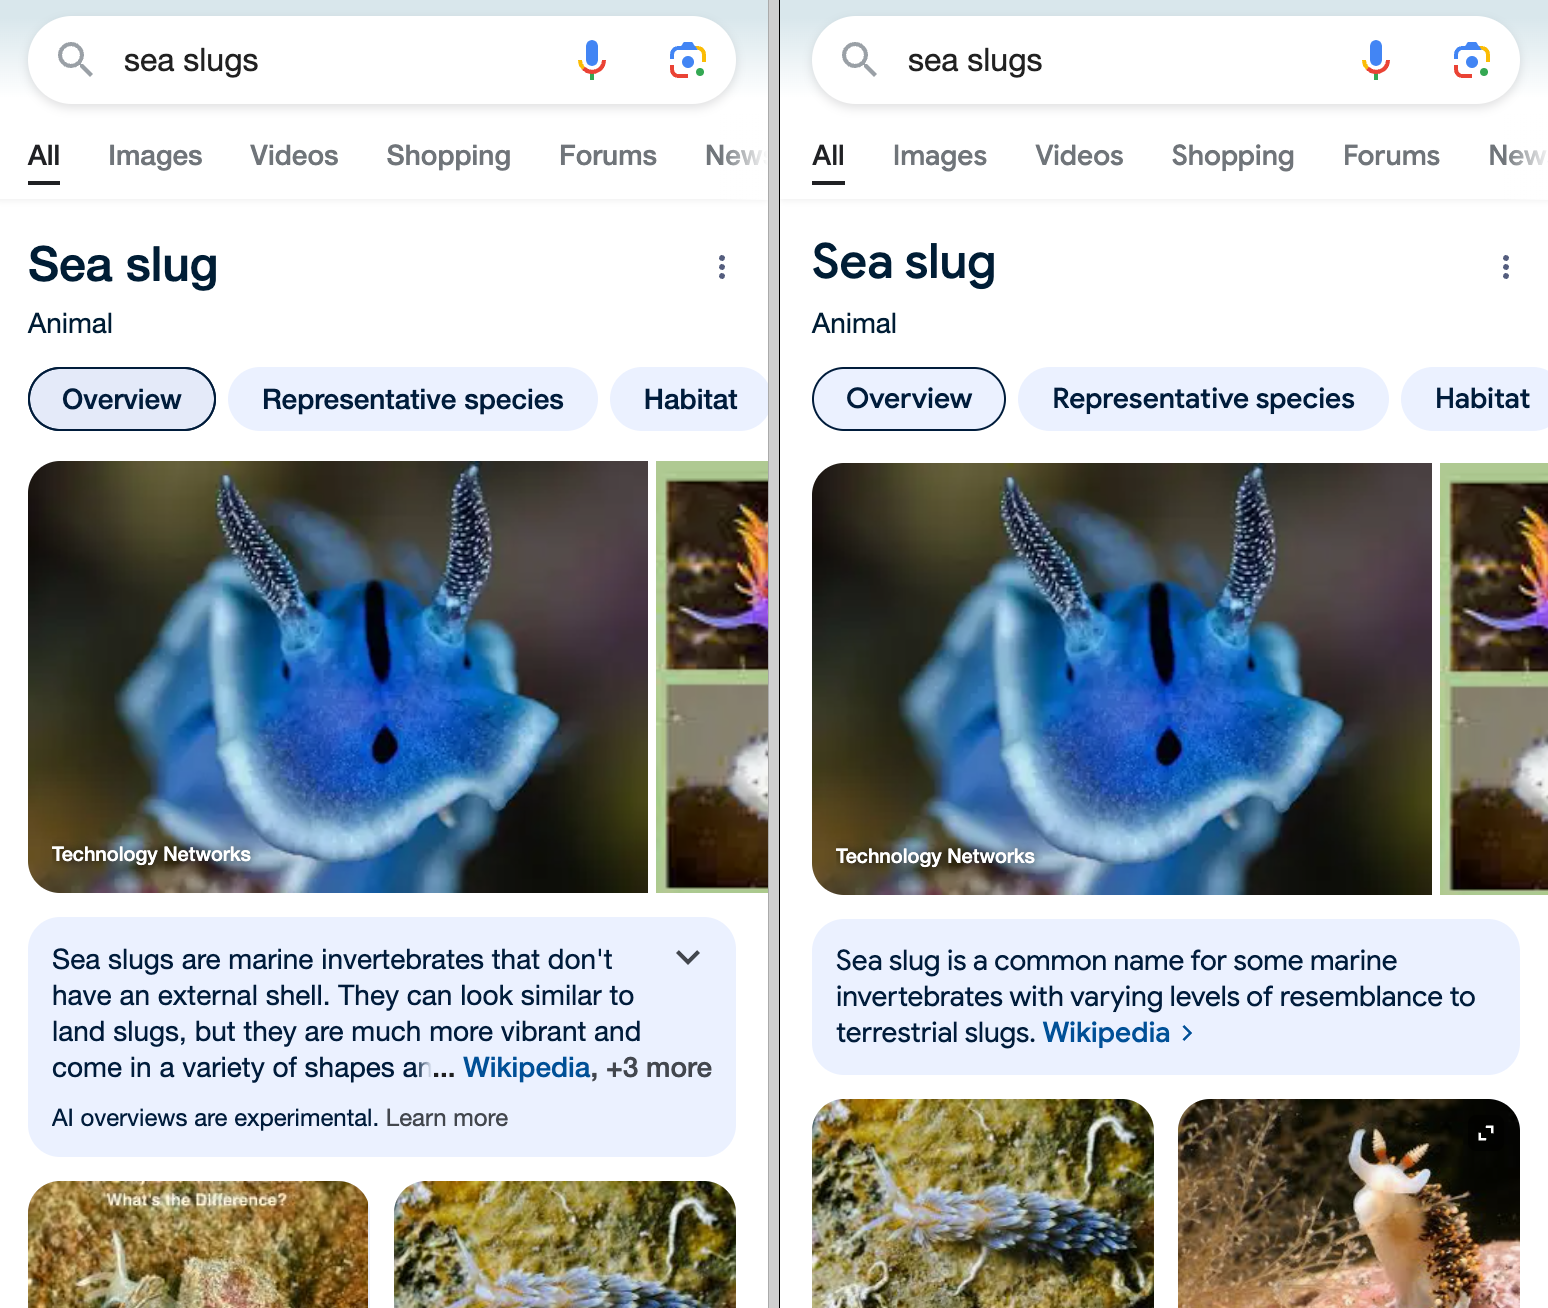 Comparison of Google results for "sea slugs" before and after AI-integration.